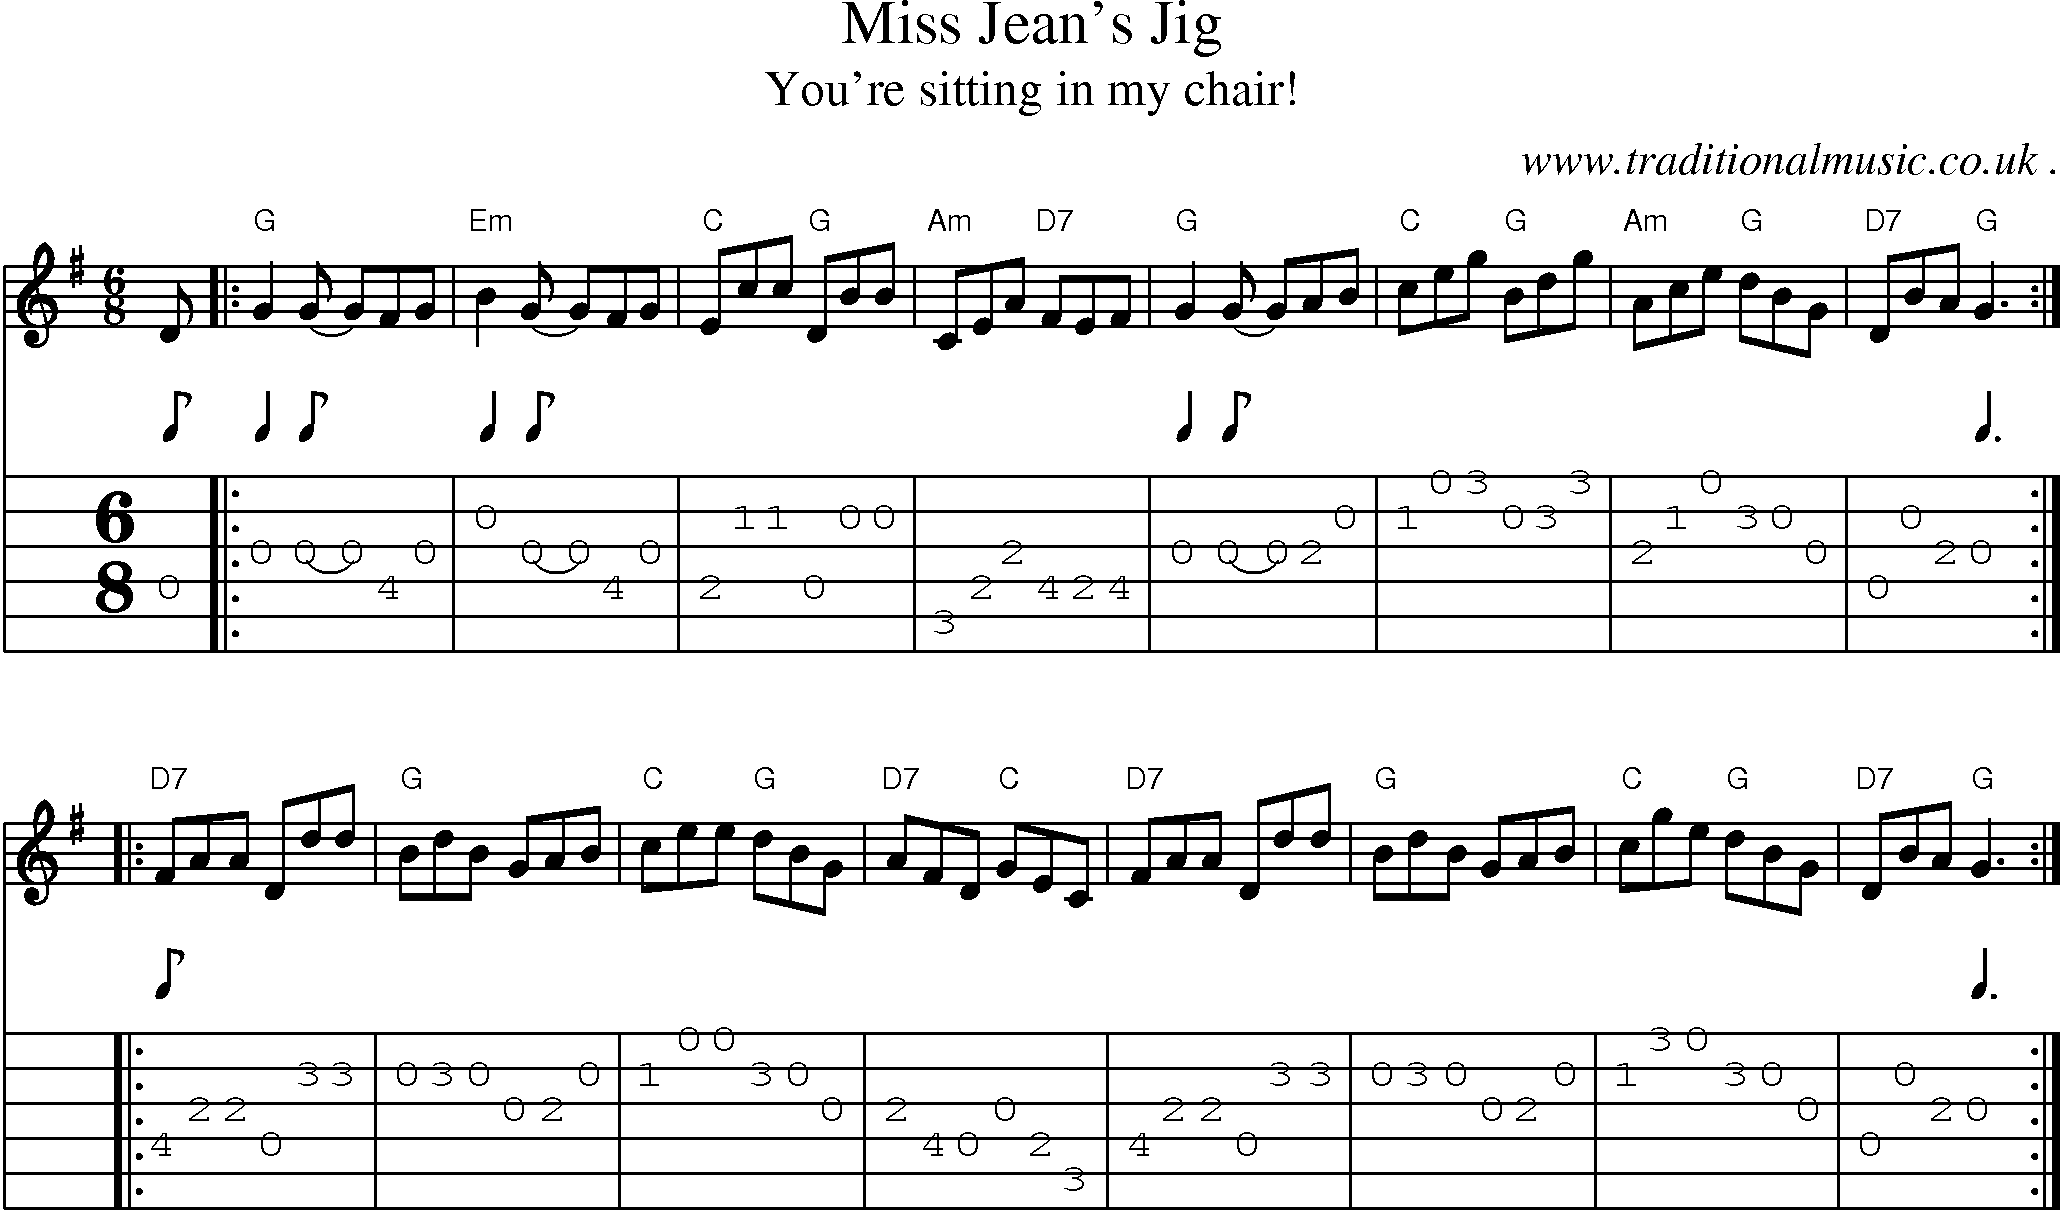 Sheet-music  score, Chords and Guitar Tabs for Miss Jeans Jig